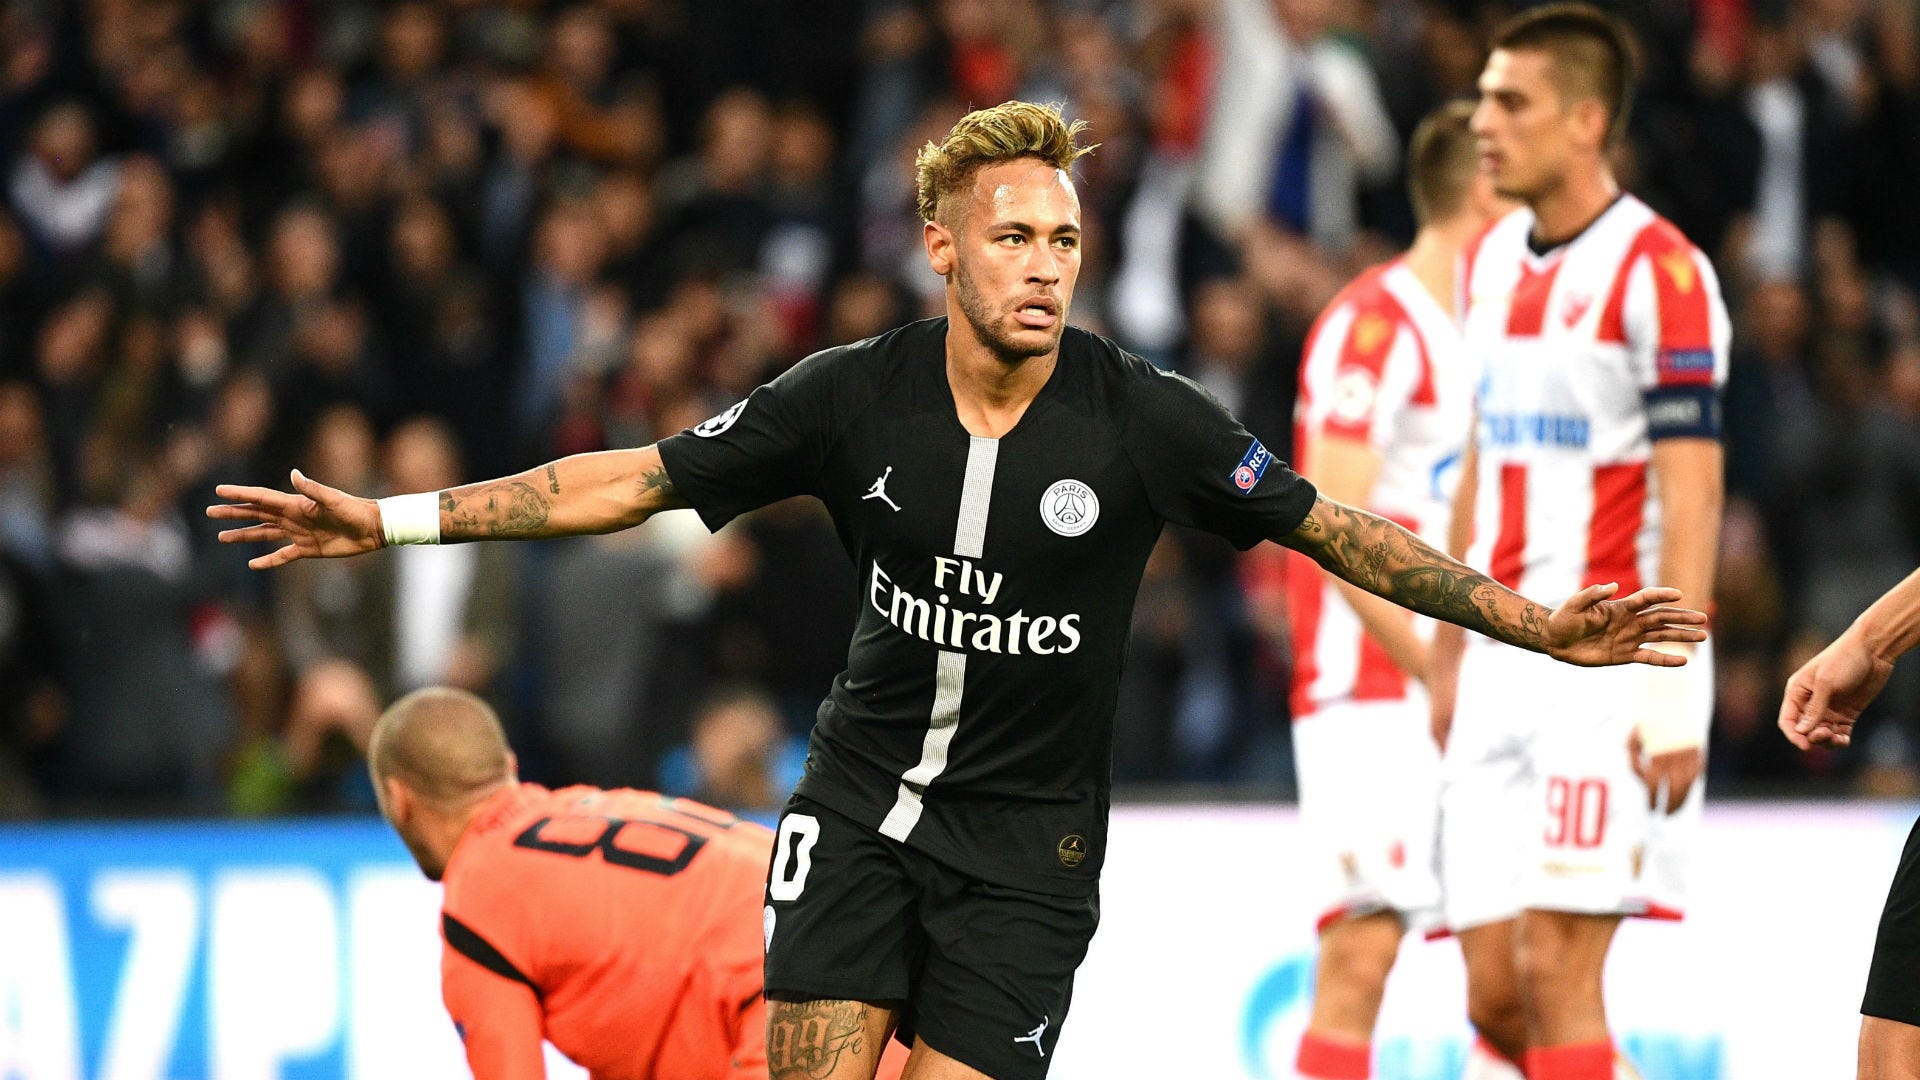 PSG vs Red Star match-fixing allegations: Serbian club angrily rejects over Champions defeat | US